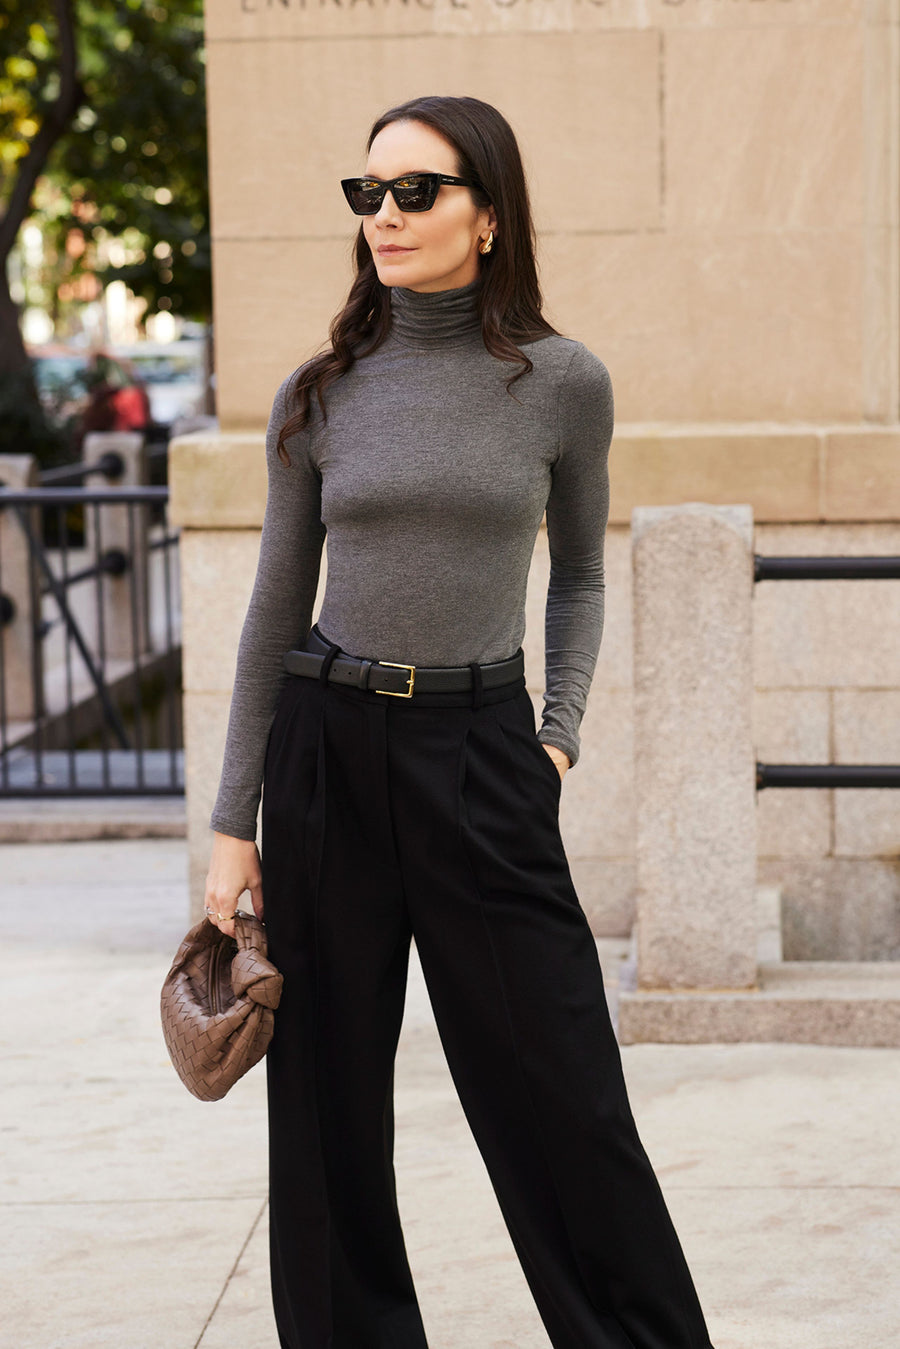 The Turtleneck In Charcoal